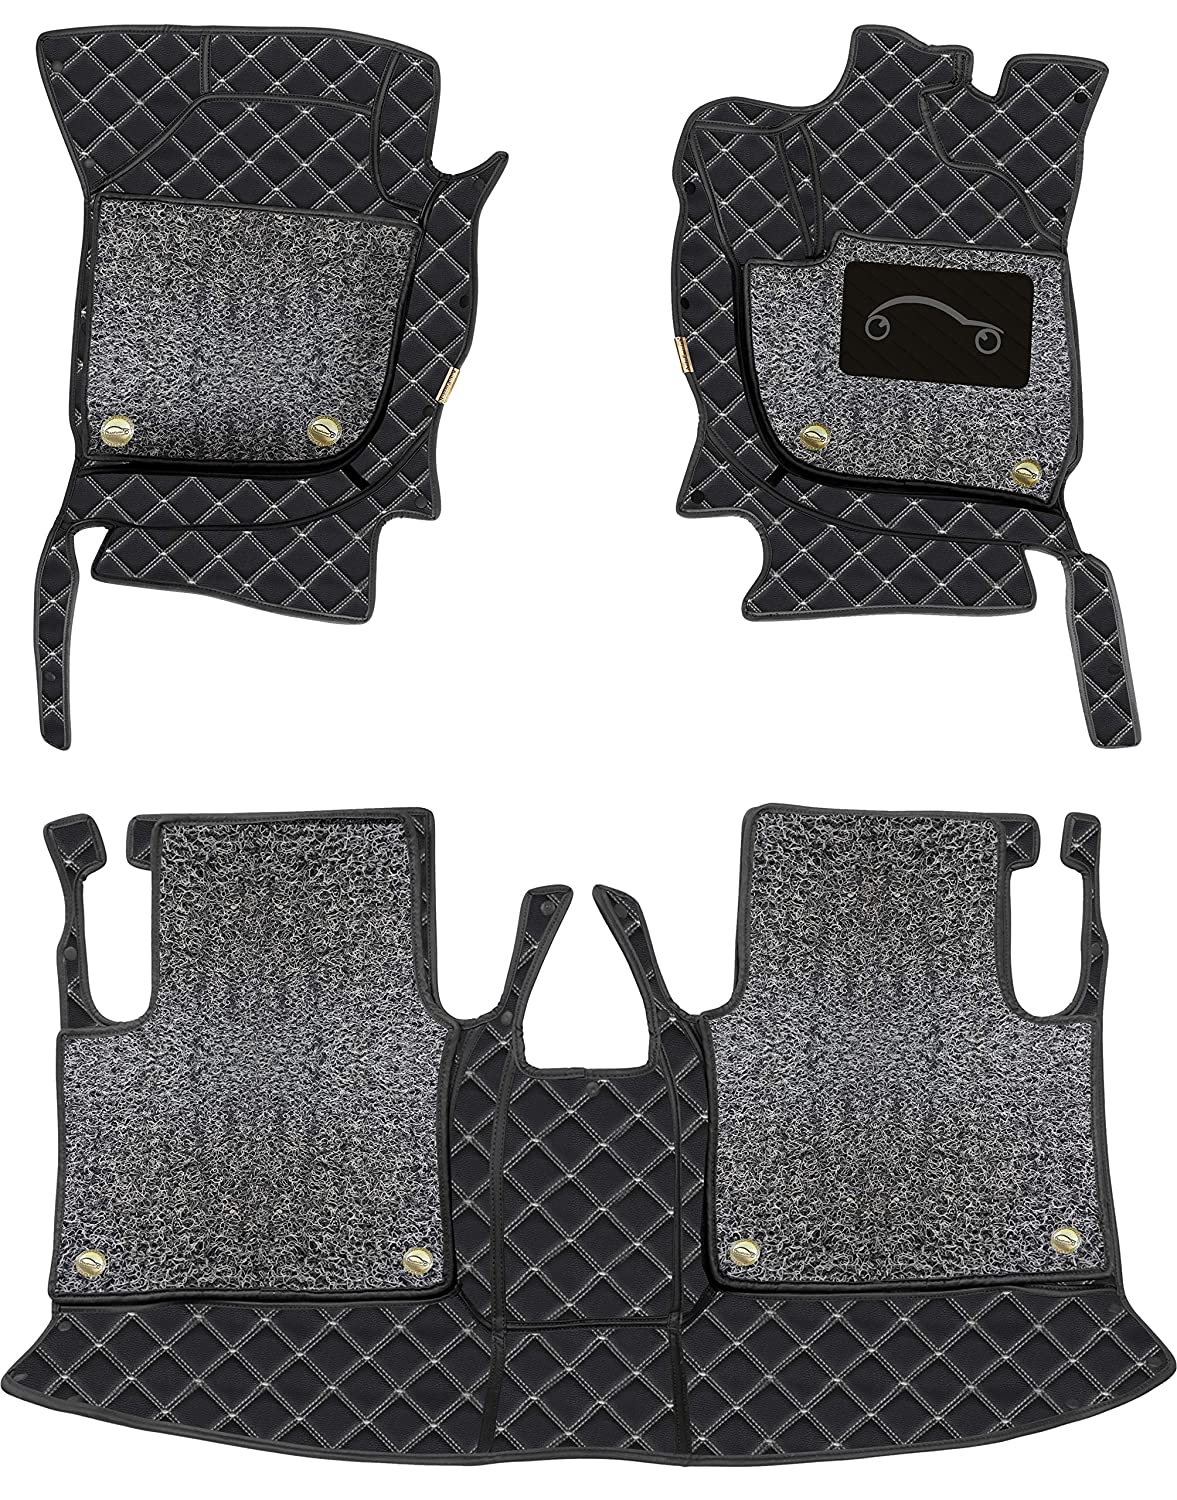 Mahindra Ssangyong Rexton 2012-18-7D Luxury Car Mat, All Weather Proof, Anti-Skid, 100% Waterproof & Odorless with Unique Diamond Fish Design (24mm Luxury PU Leather, 2 Rows)